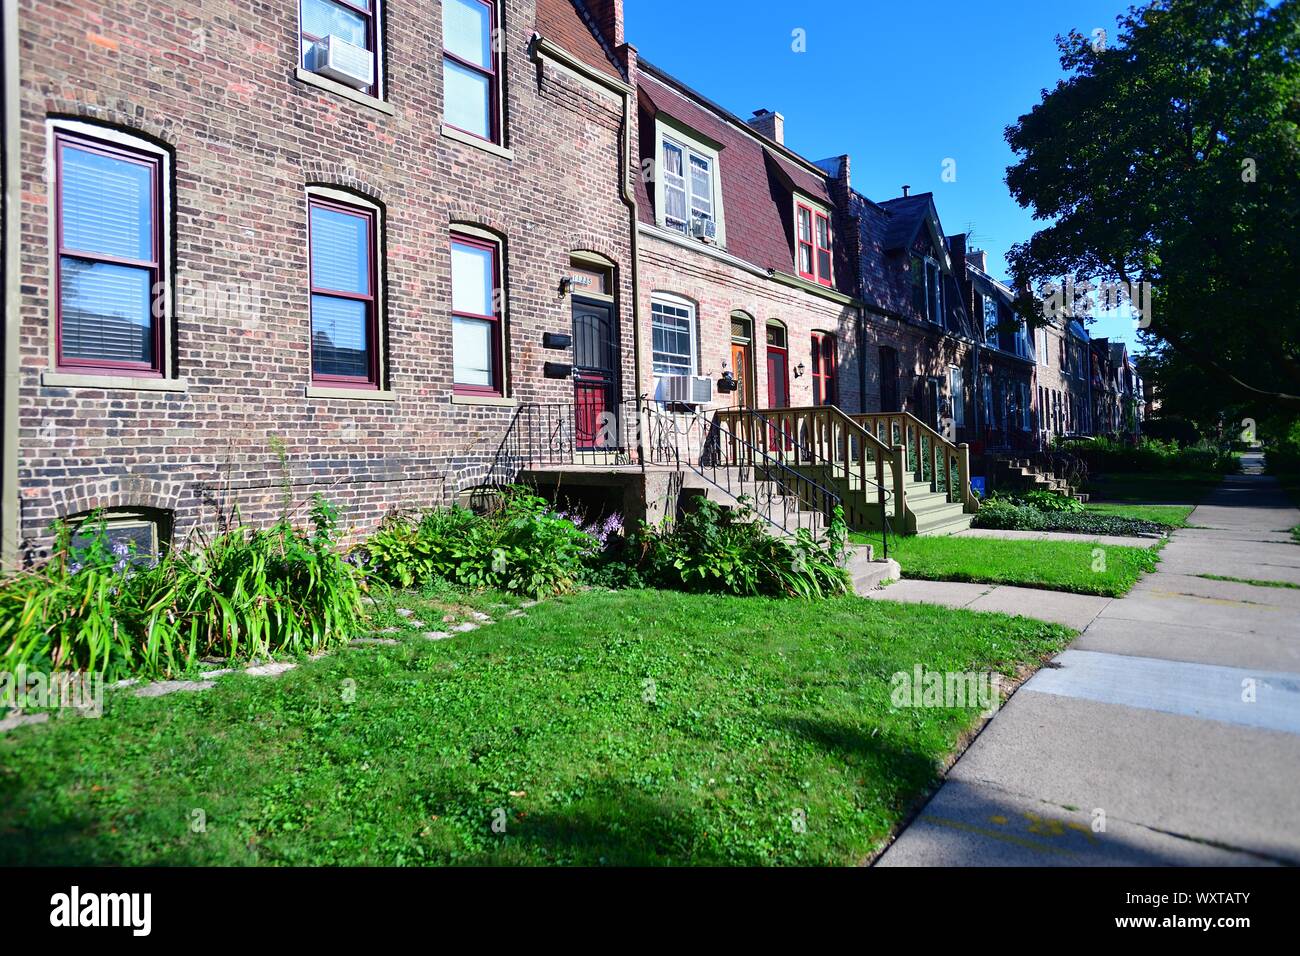 Chicago, Illinois, USA. A residential block of single-family homes in the working class neighborhood of Pullman. Stock Photo